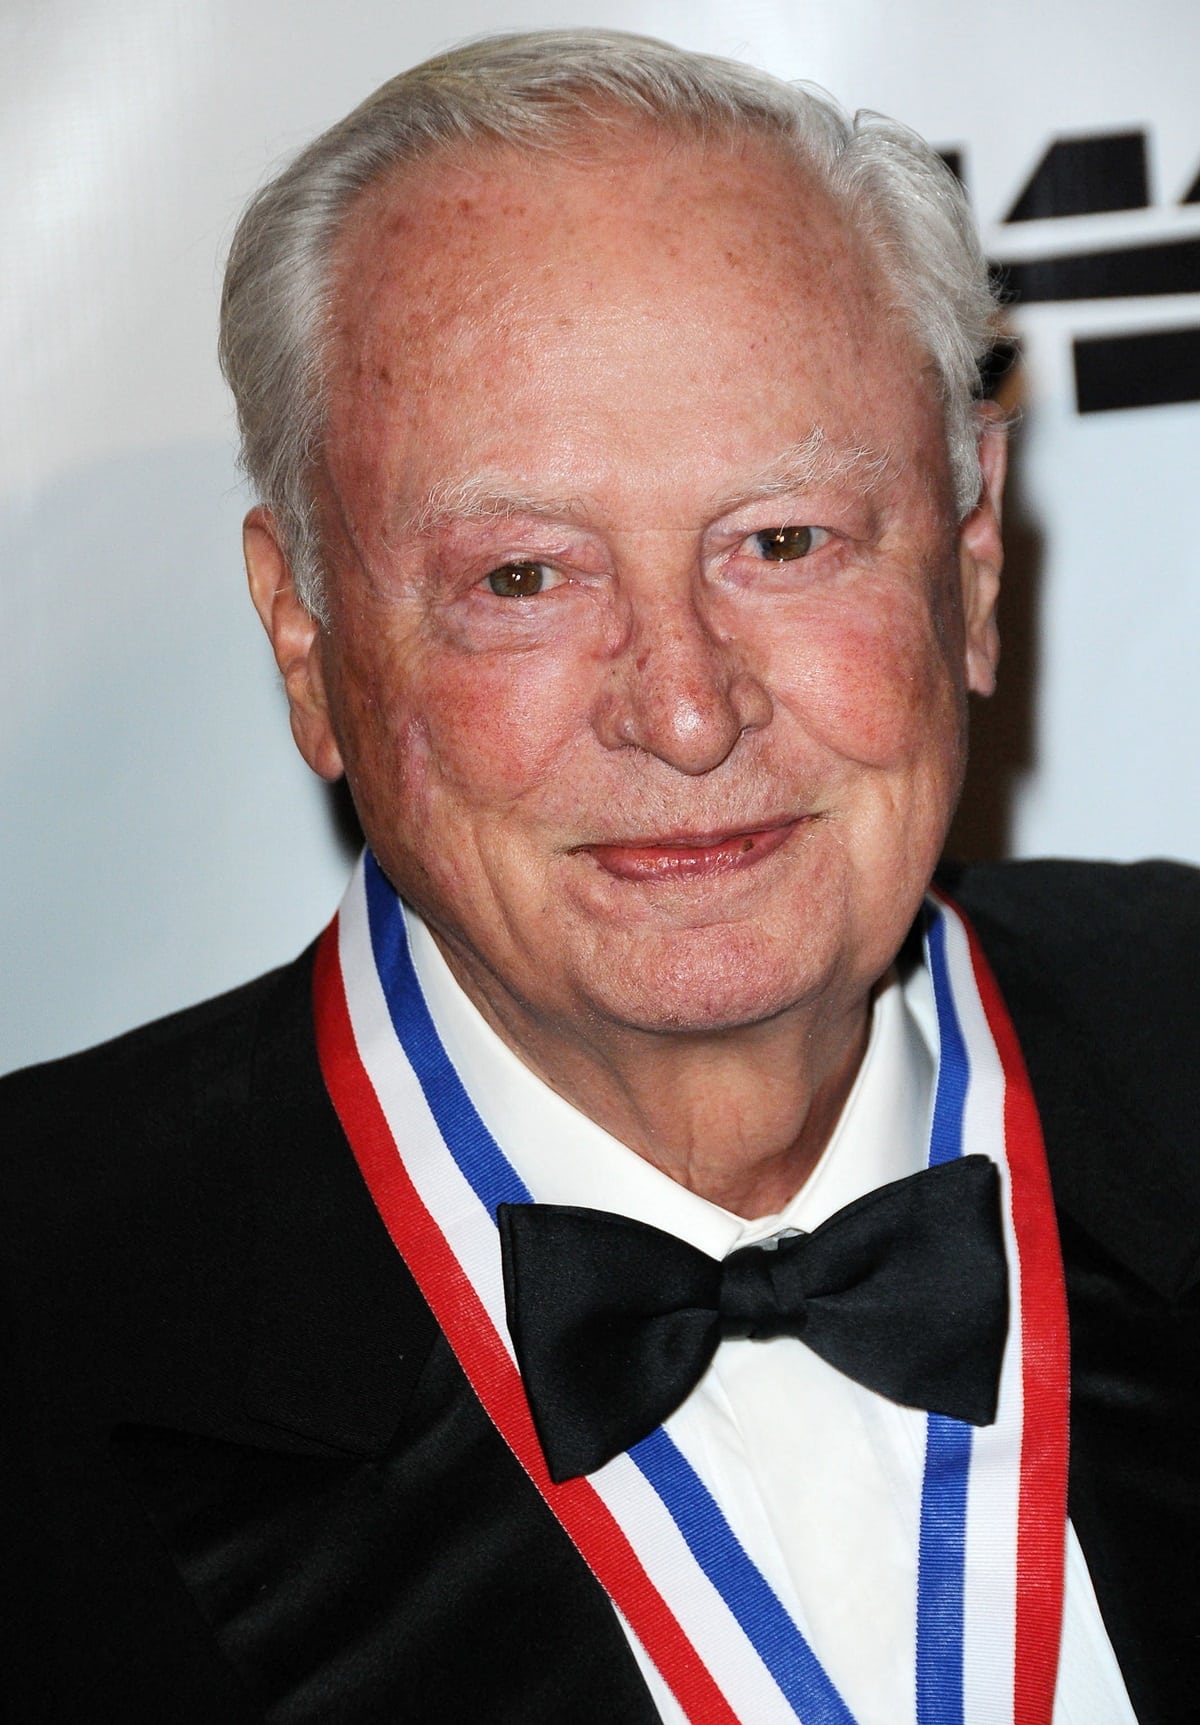 Barron Hilton was an American businessman and philanthropist, best known for his role in expanding and managing the Hilton Hotels chain, which was founded by his father Conrad Hilton